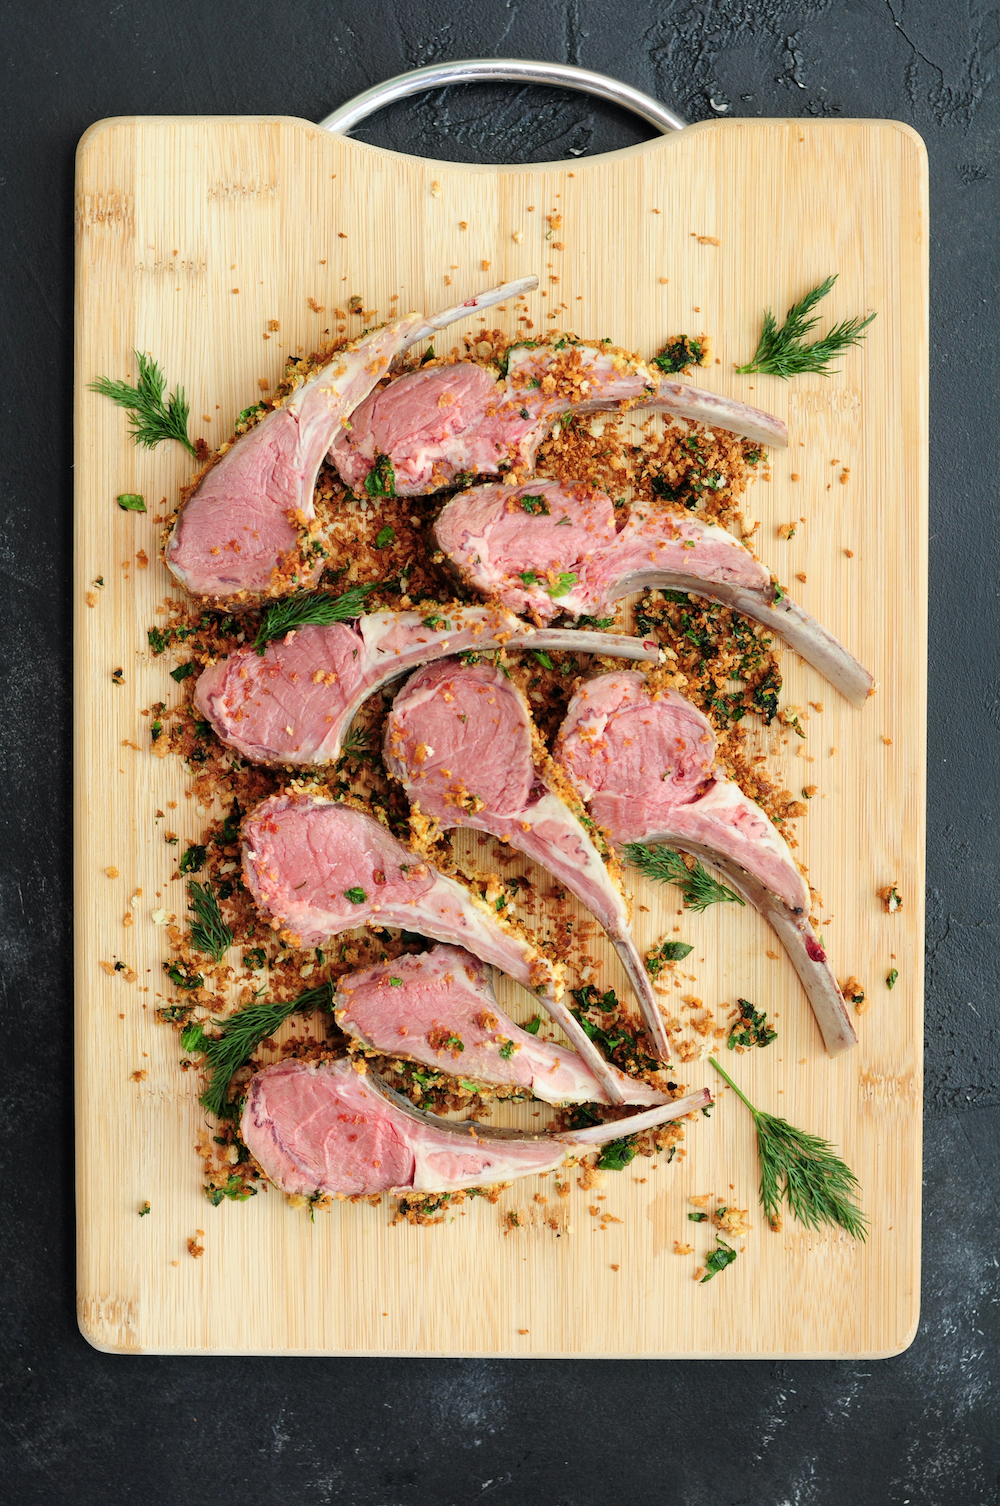 Sous Vide Rack of Lamb with Green Herb Crust